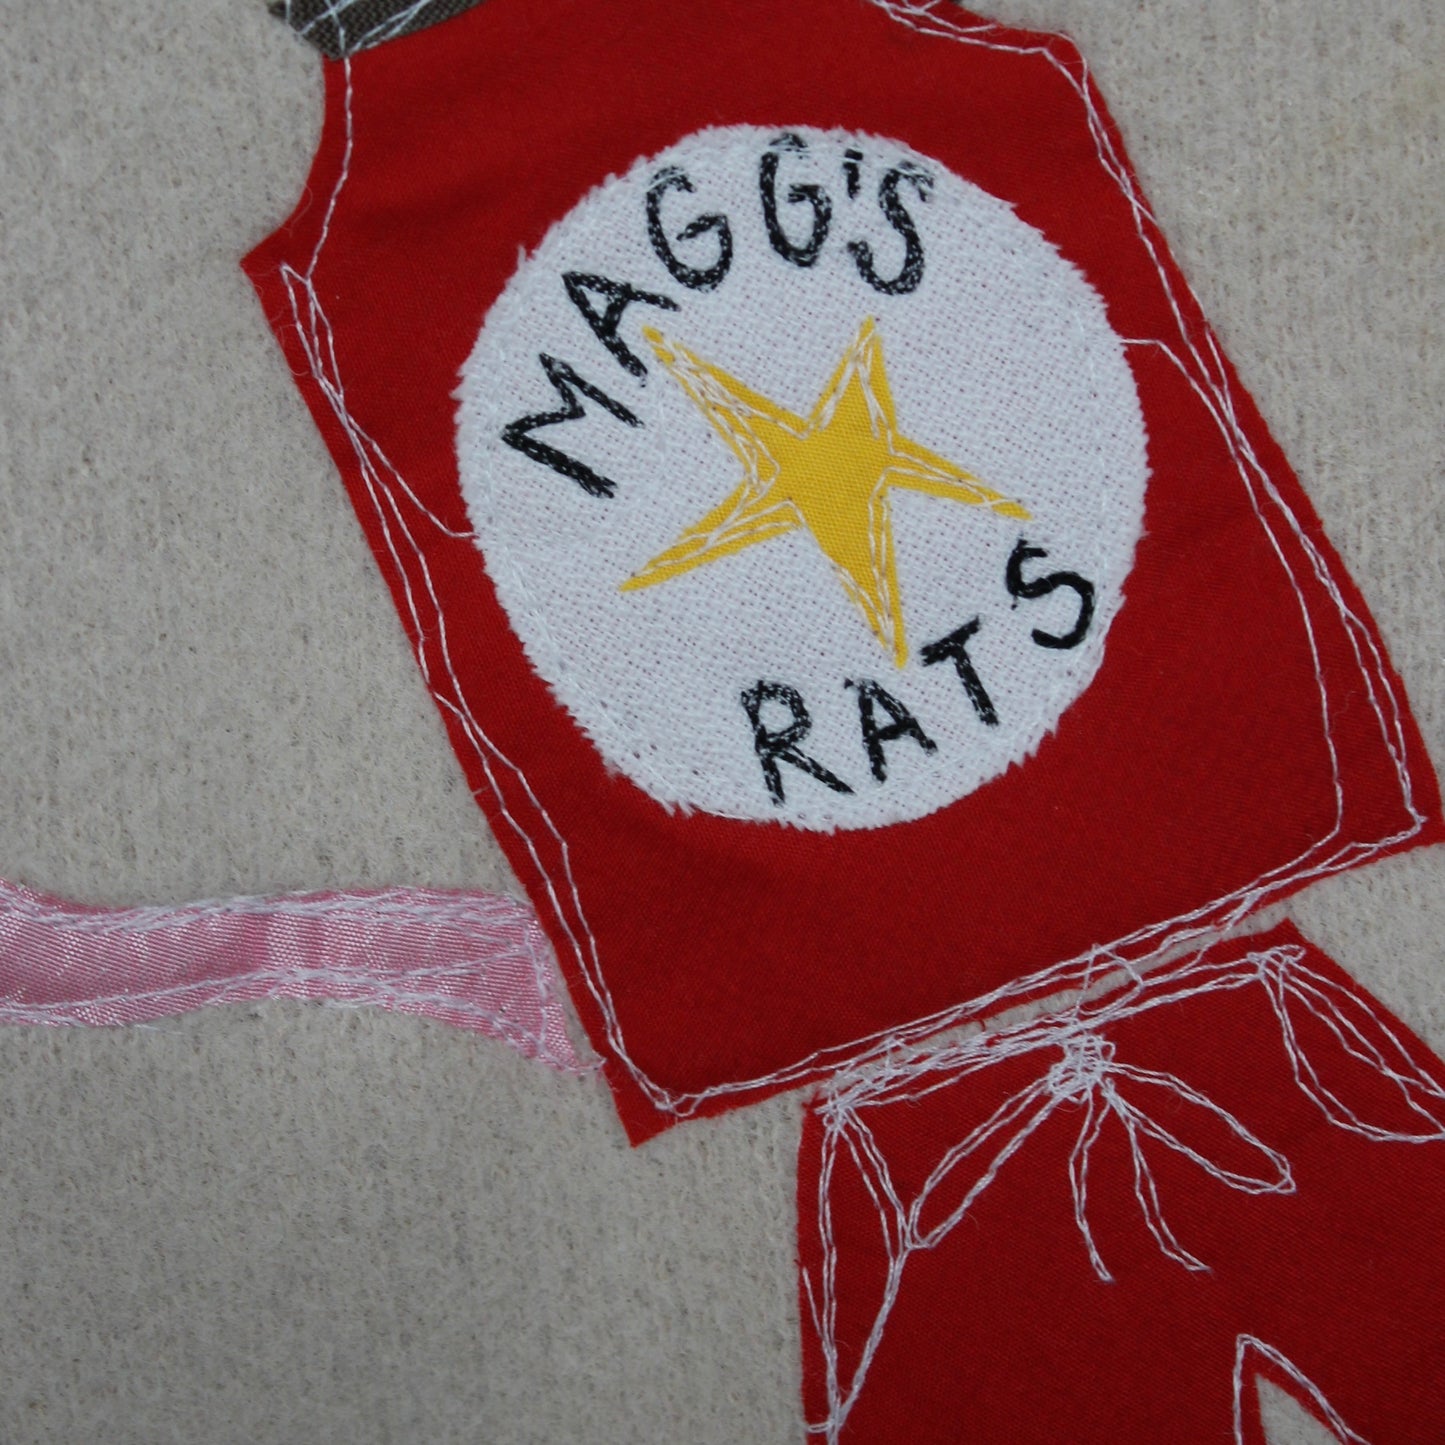 MAGG’S RATSketball sweater(small)